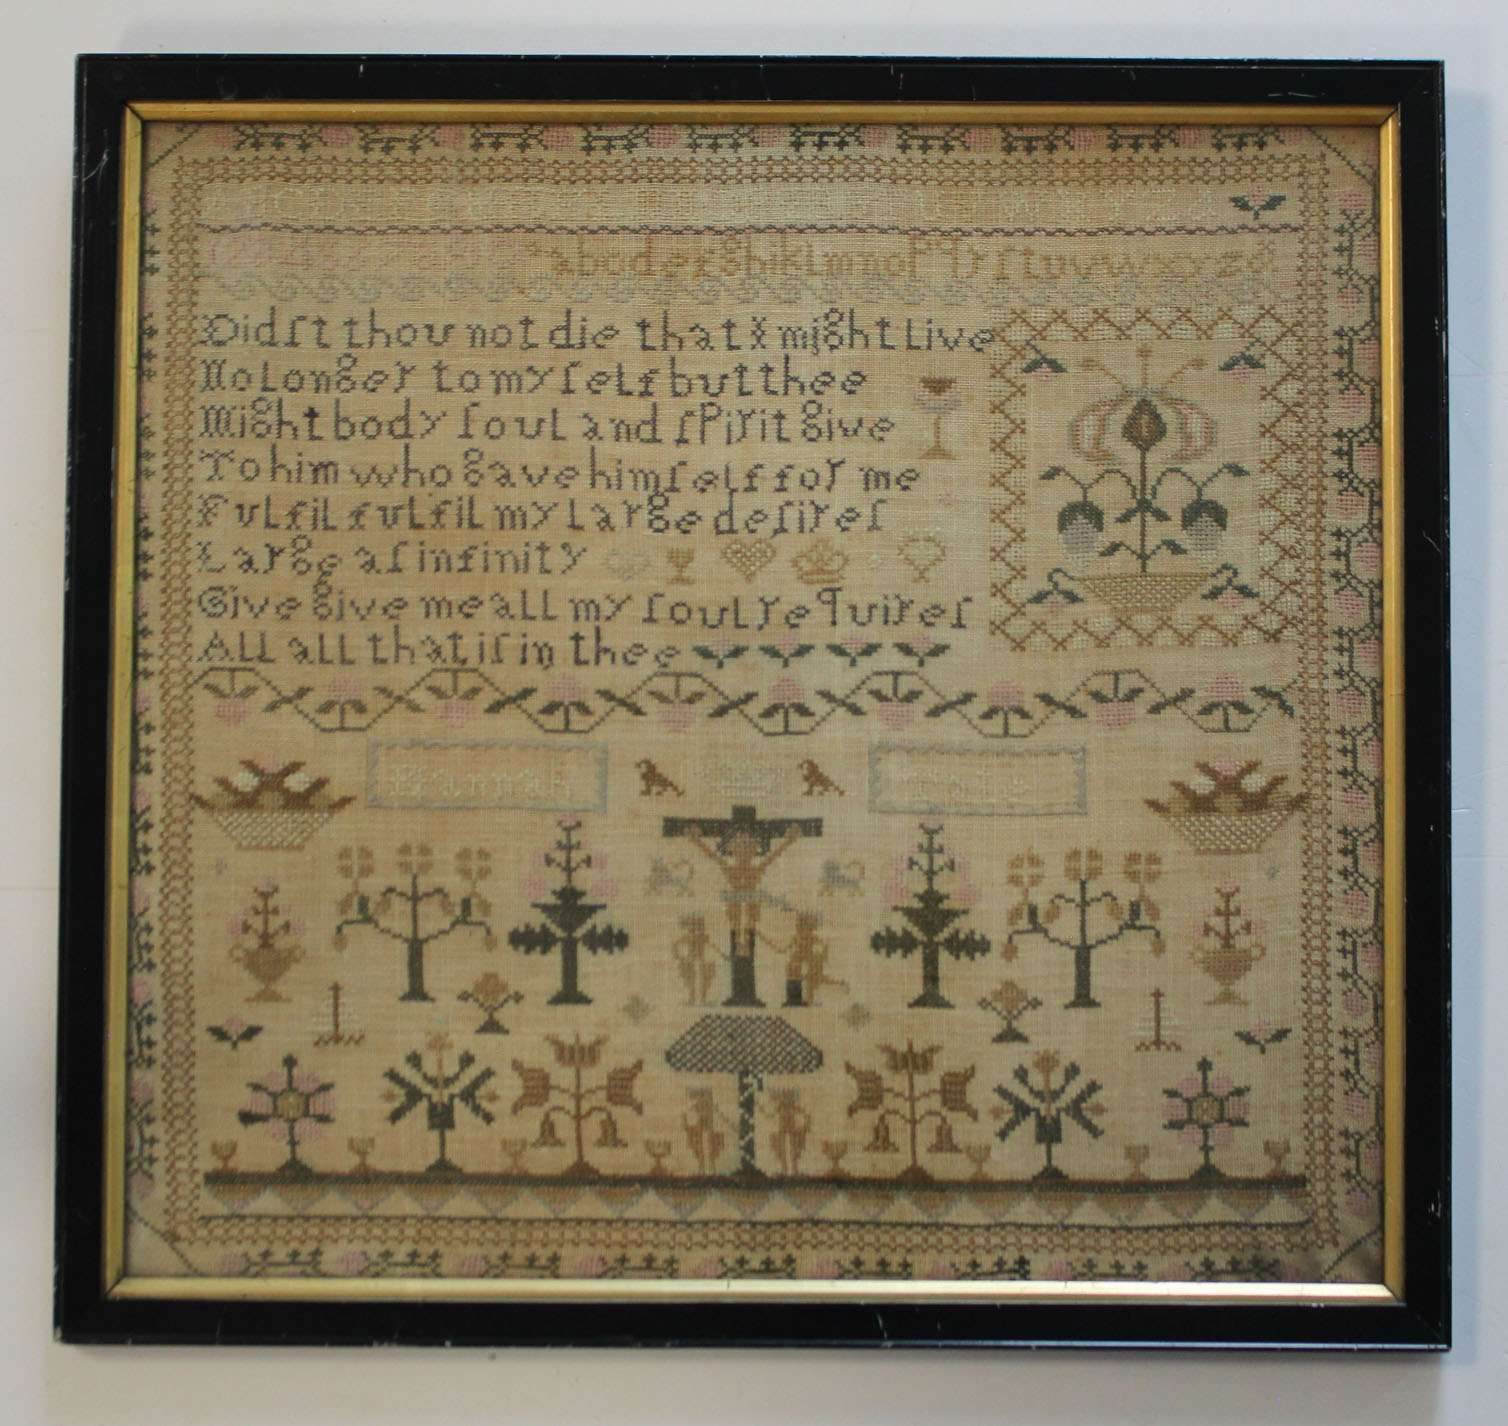 Sampler. An elborately decorated sampler, by 'Hannah Tate', circa late 18th to early 19th